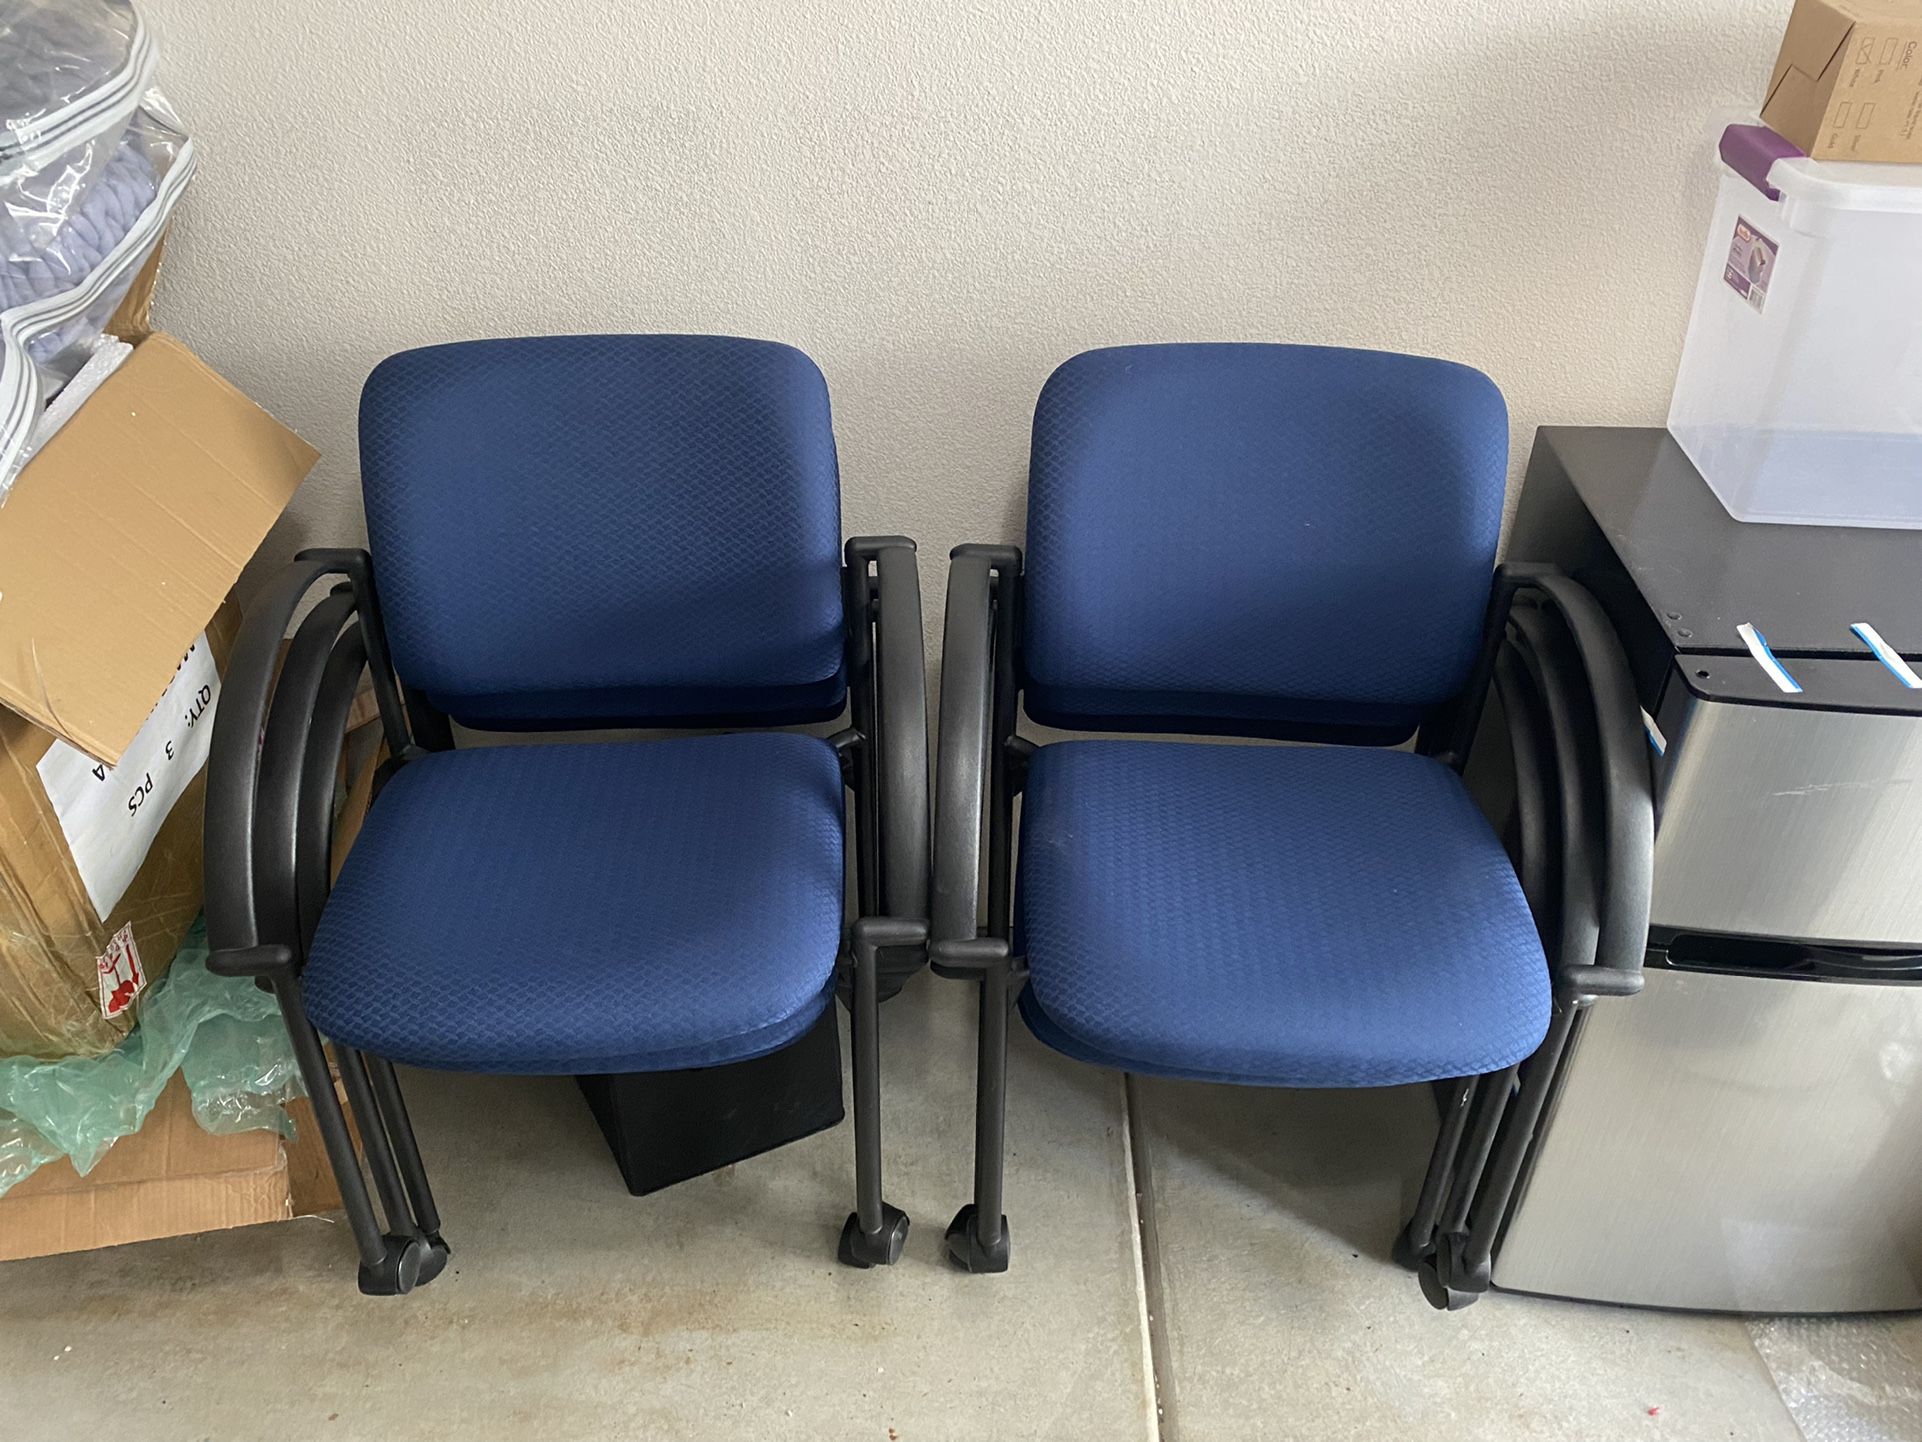  6 Pc Chairs For medical/dental Office Or Waiting Room 